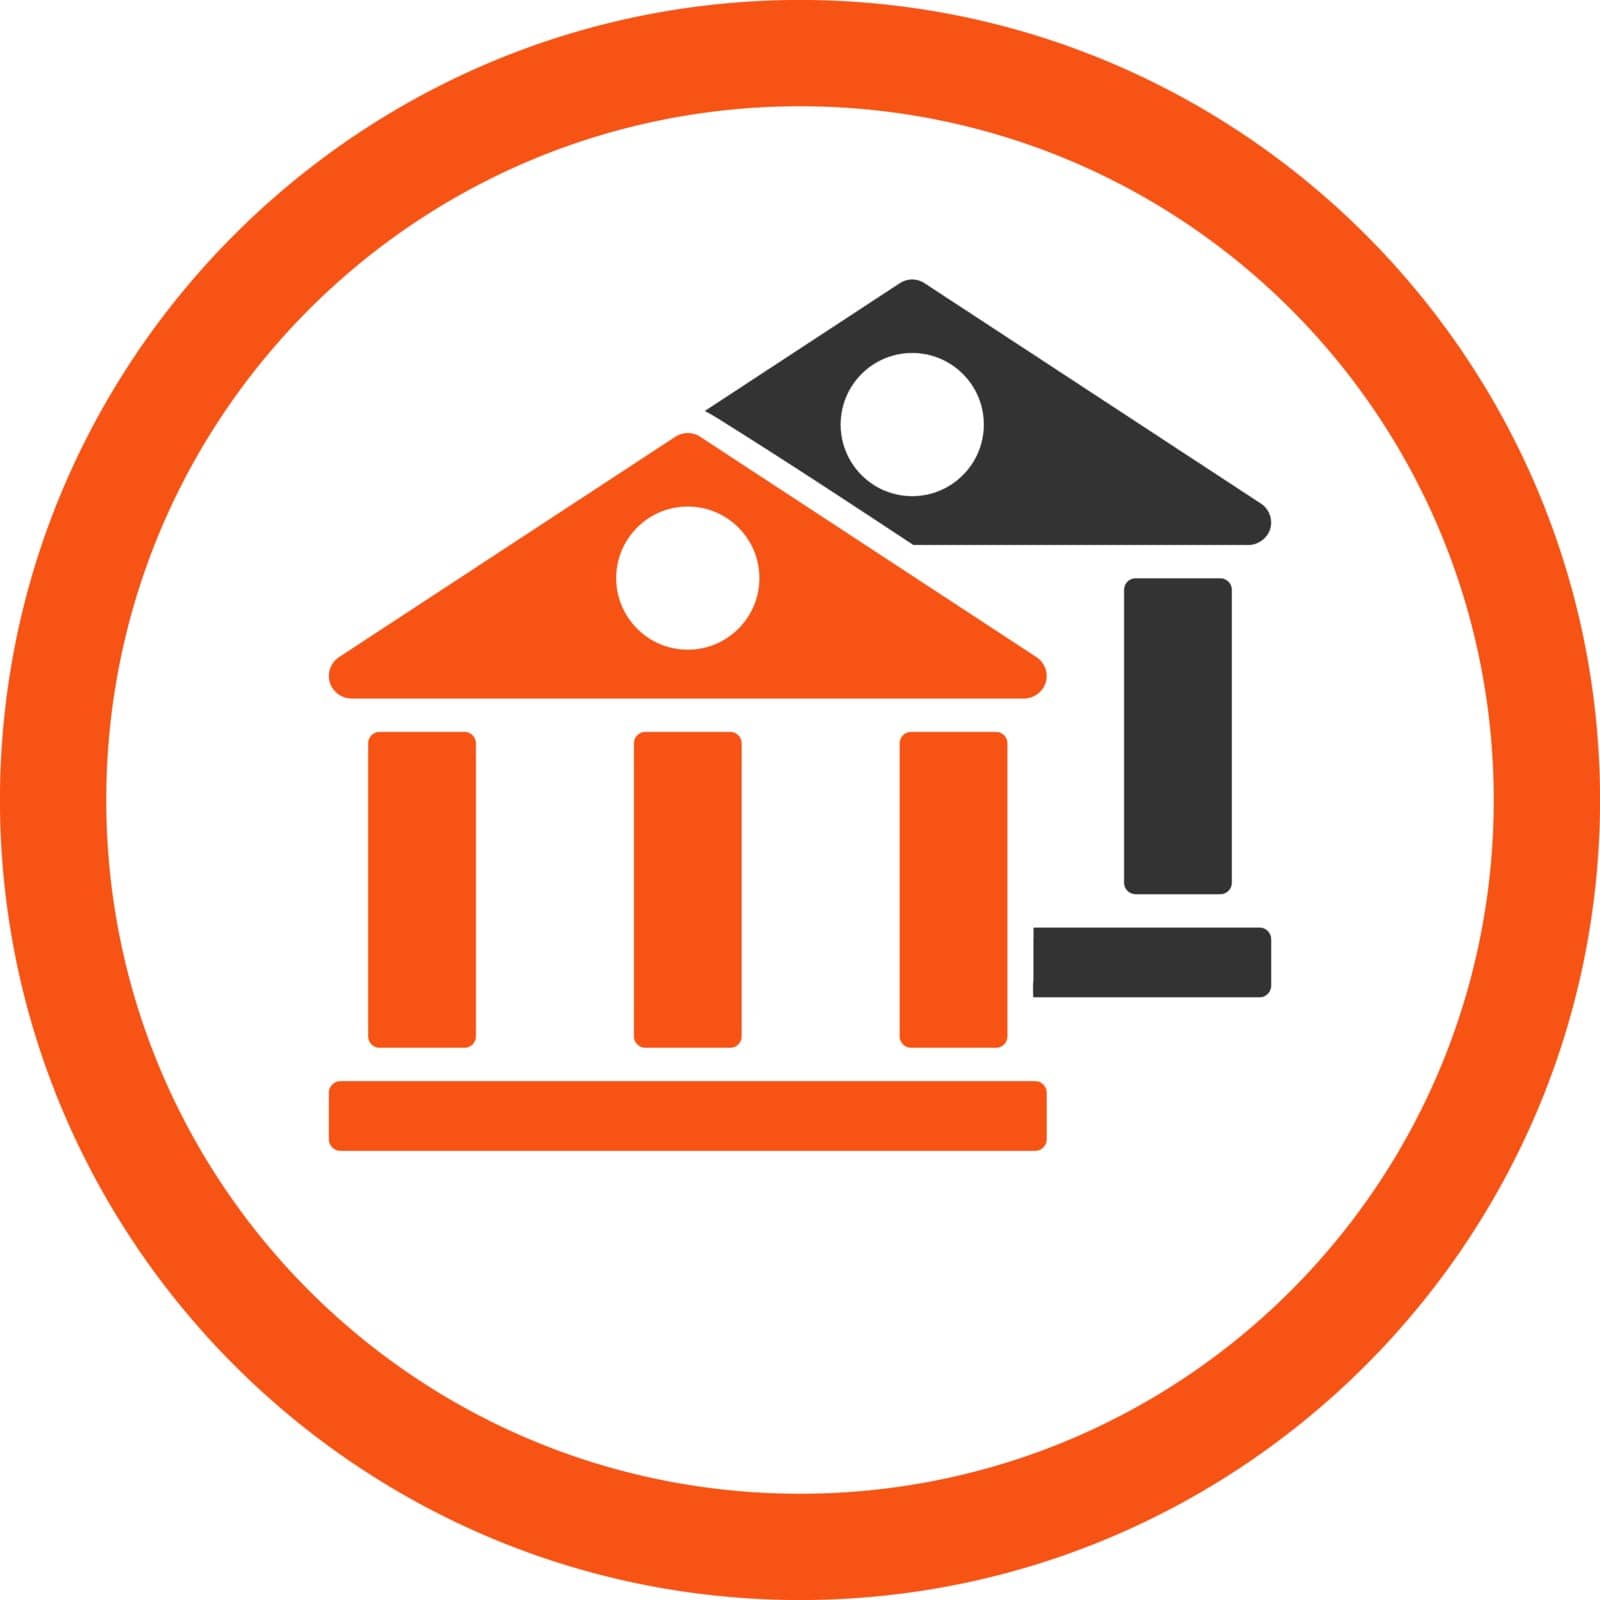 Banks vector icon. This flat rounded symbol uses orange and gray colors and isolated on a white background.